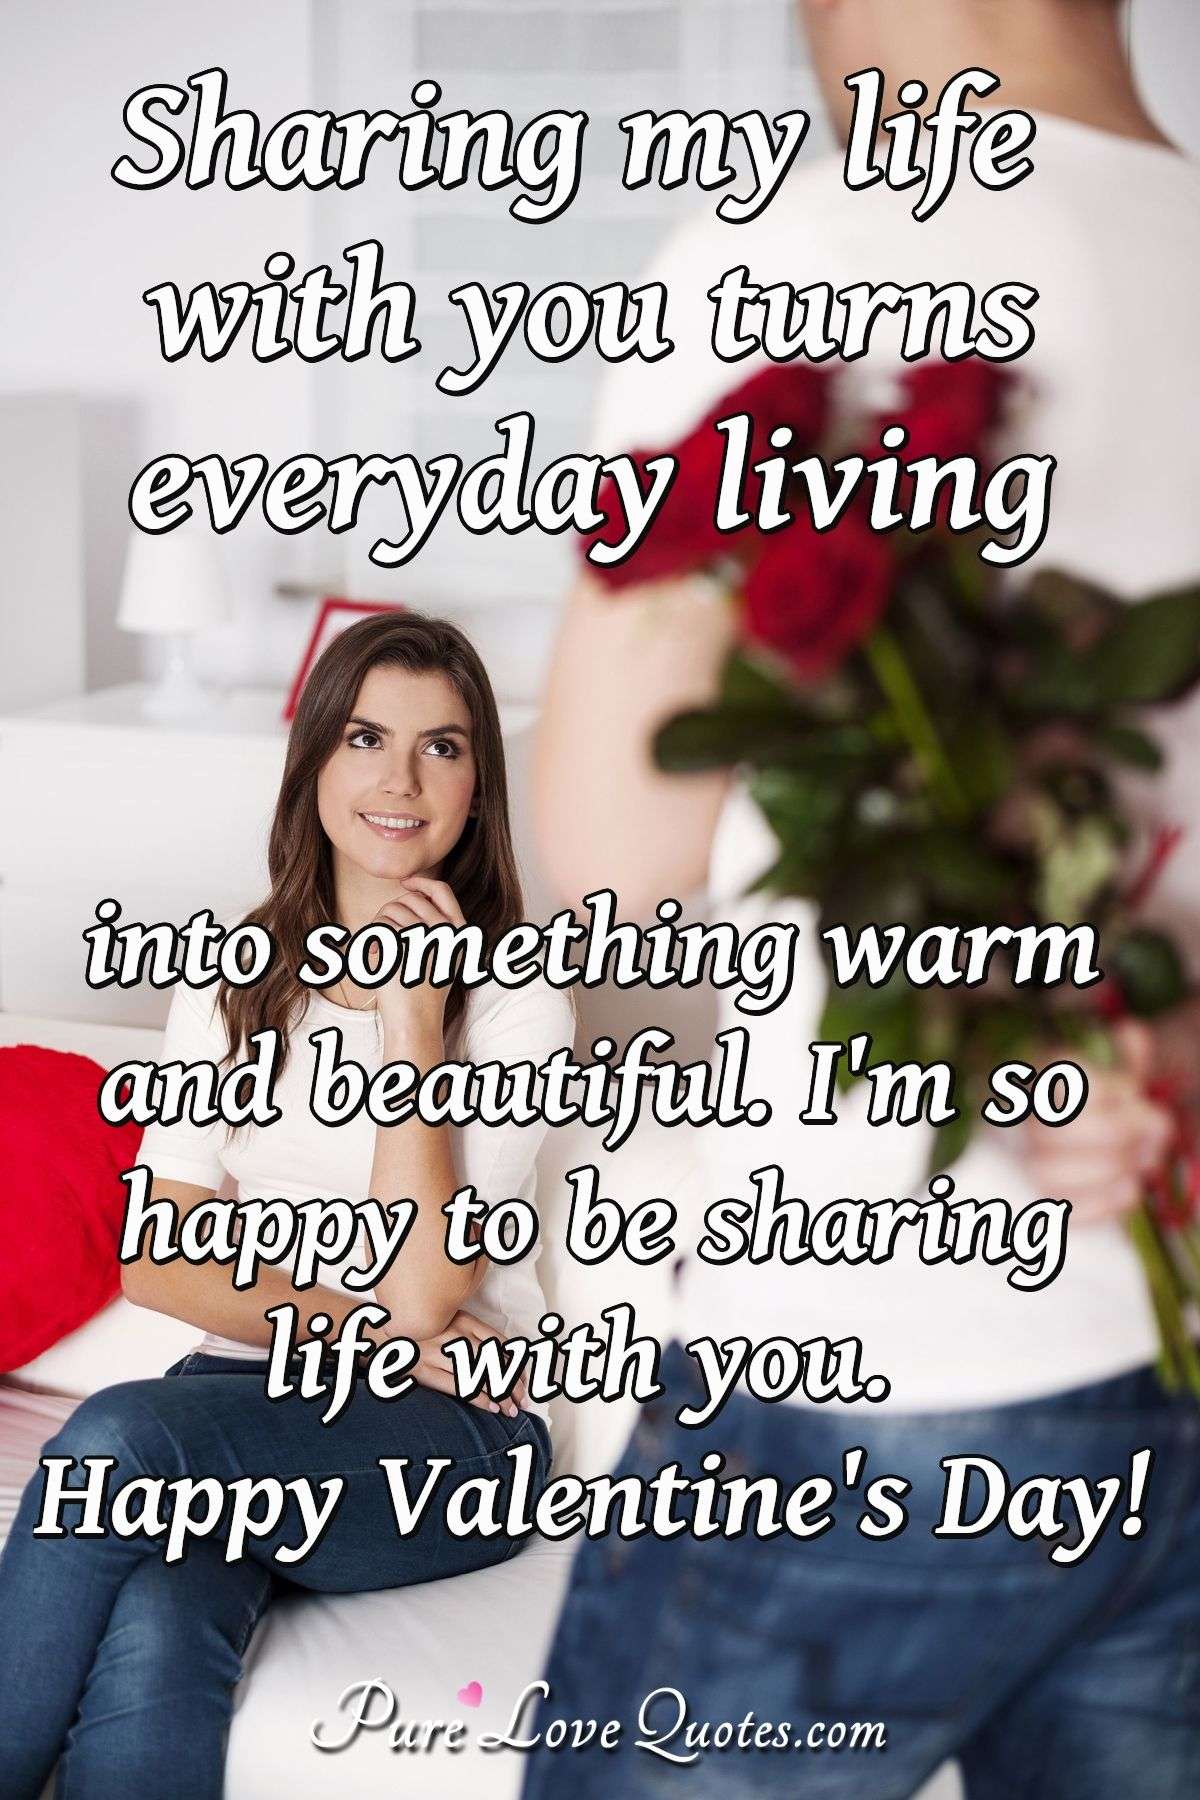 Sharing my life with you turns everyday living into something warm and beautiful. I'm so happy to be sharing life with you. Happy Valentine's Day! - Anonymous